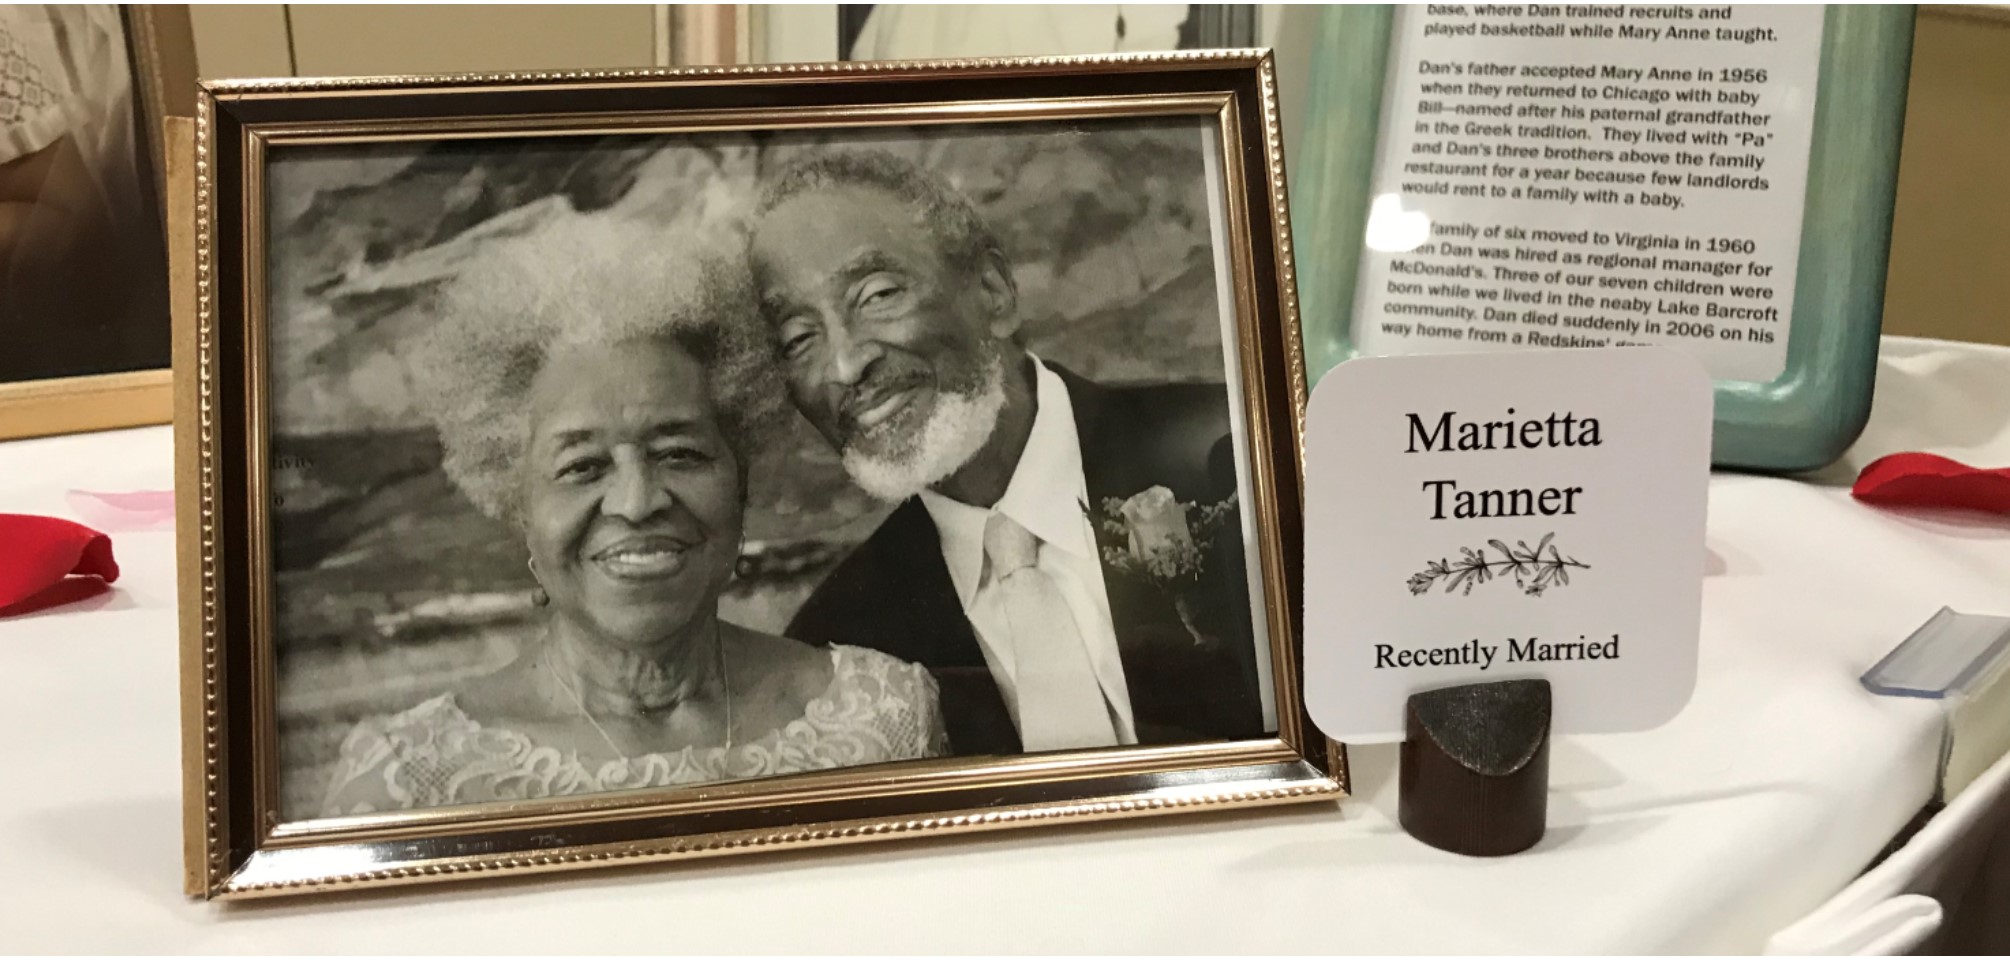 this is a photo of a wedding photo. In the wedding photo are two older African American people who are smiling on their wedding day